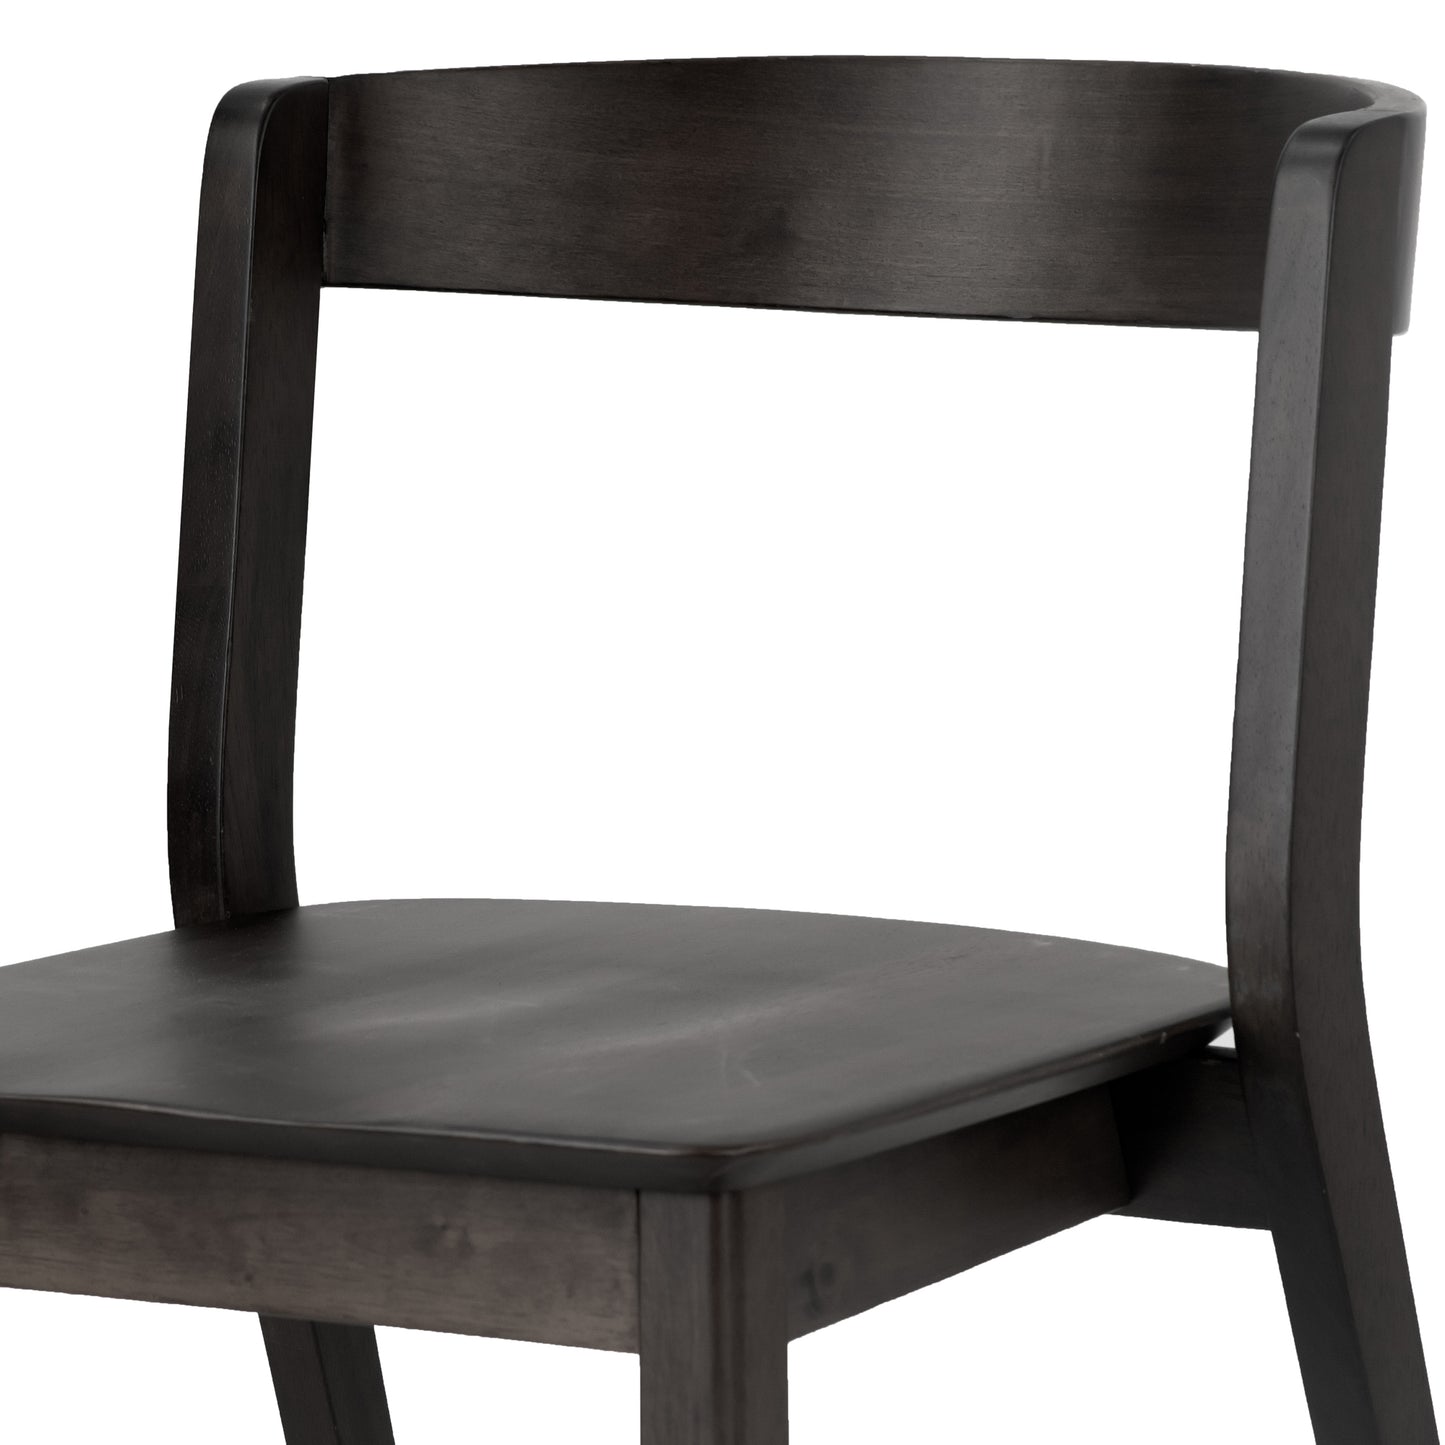 Set of 2 Astor Black Solid Wood Chair with Curved Back